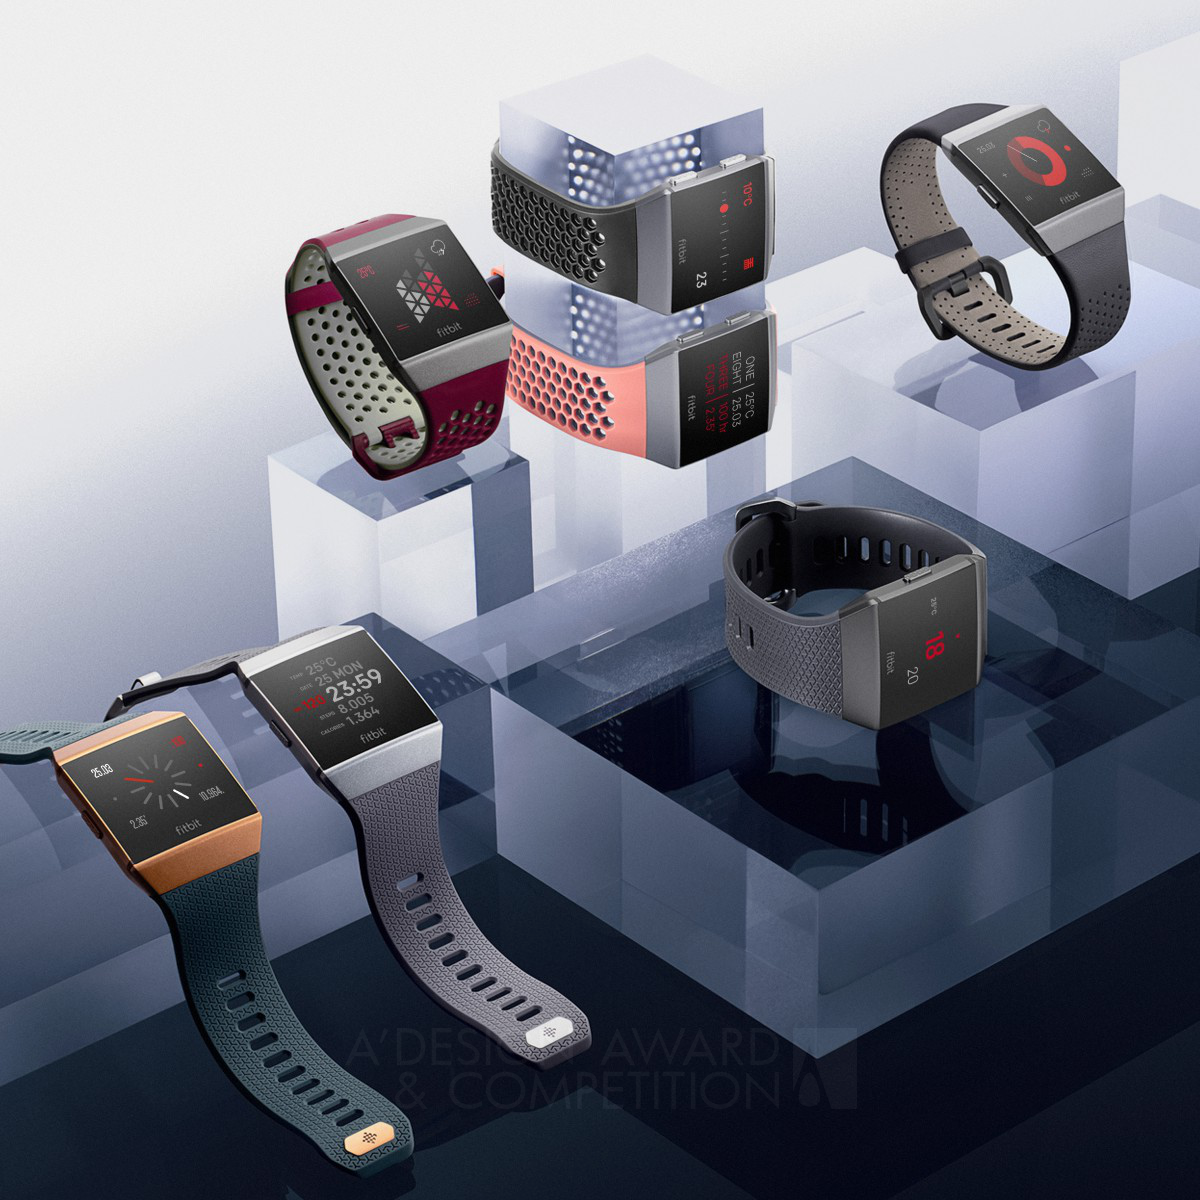 TTMM for Fitbit <b>clock faces apps